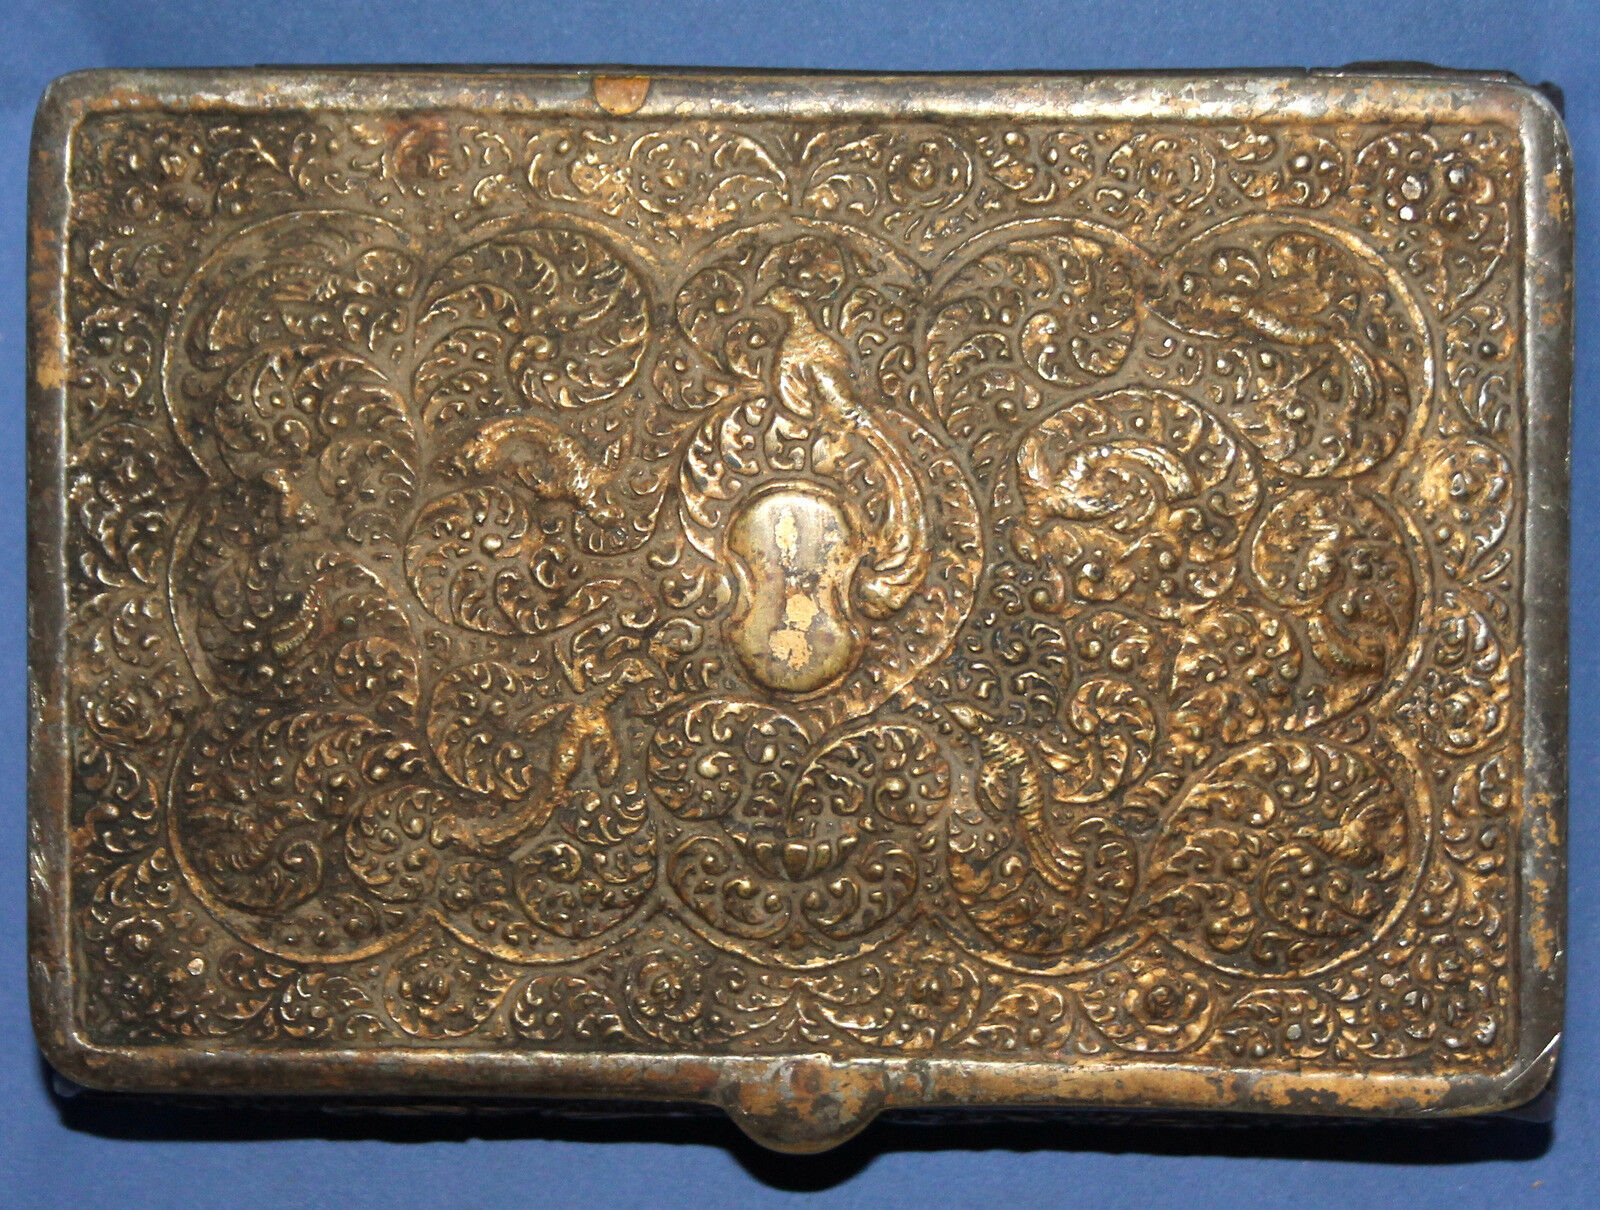 Antique Ornate Floral Metal footed jewellery box